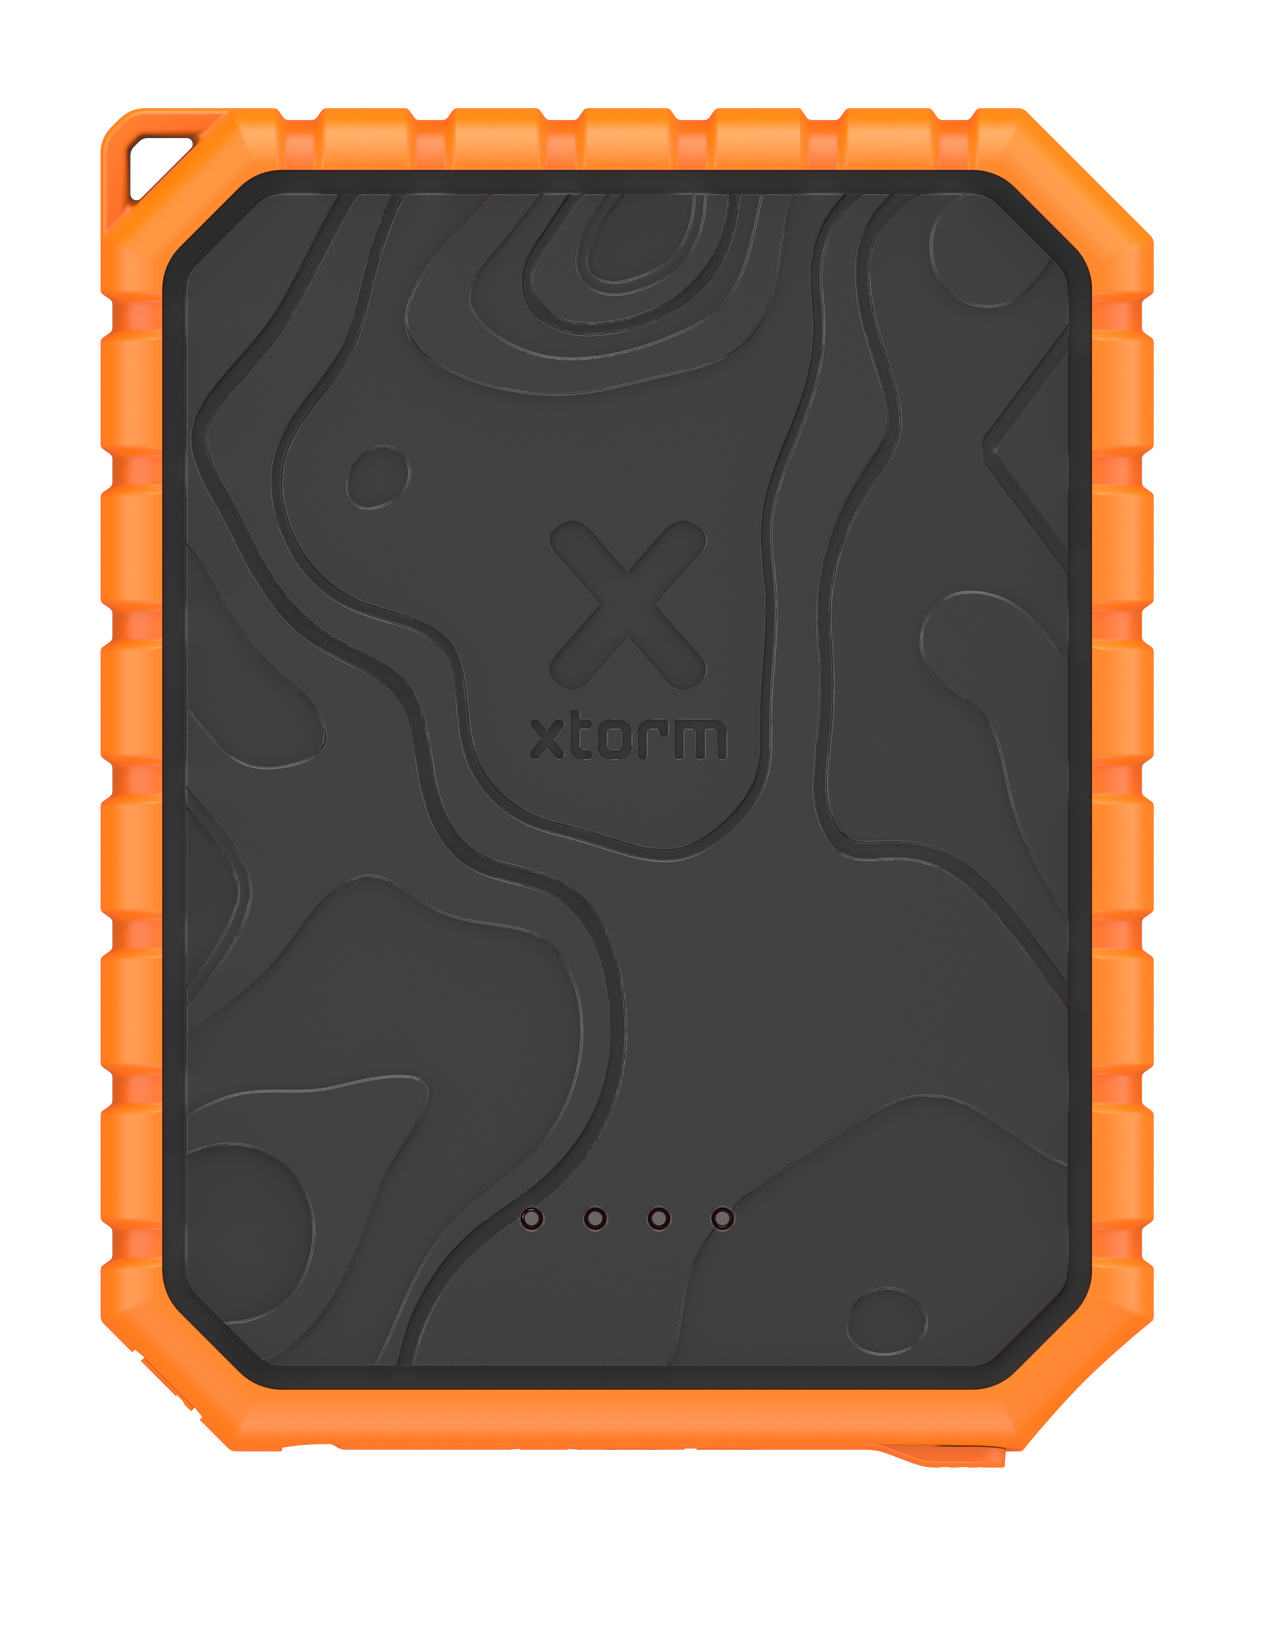 Xtorm Xtreme Powerbank Rugged 20W - 10.000 mAh - Outdoor - Waterdicht met zaklamp - Quick Charge 3.0